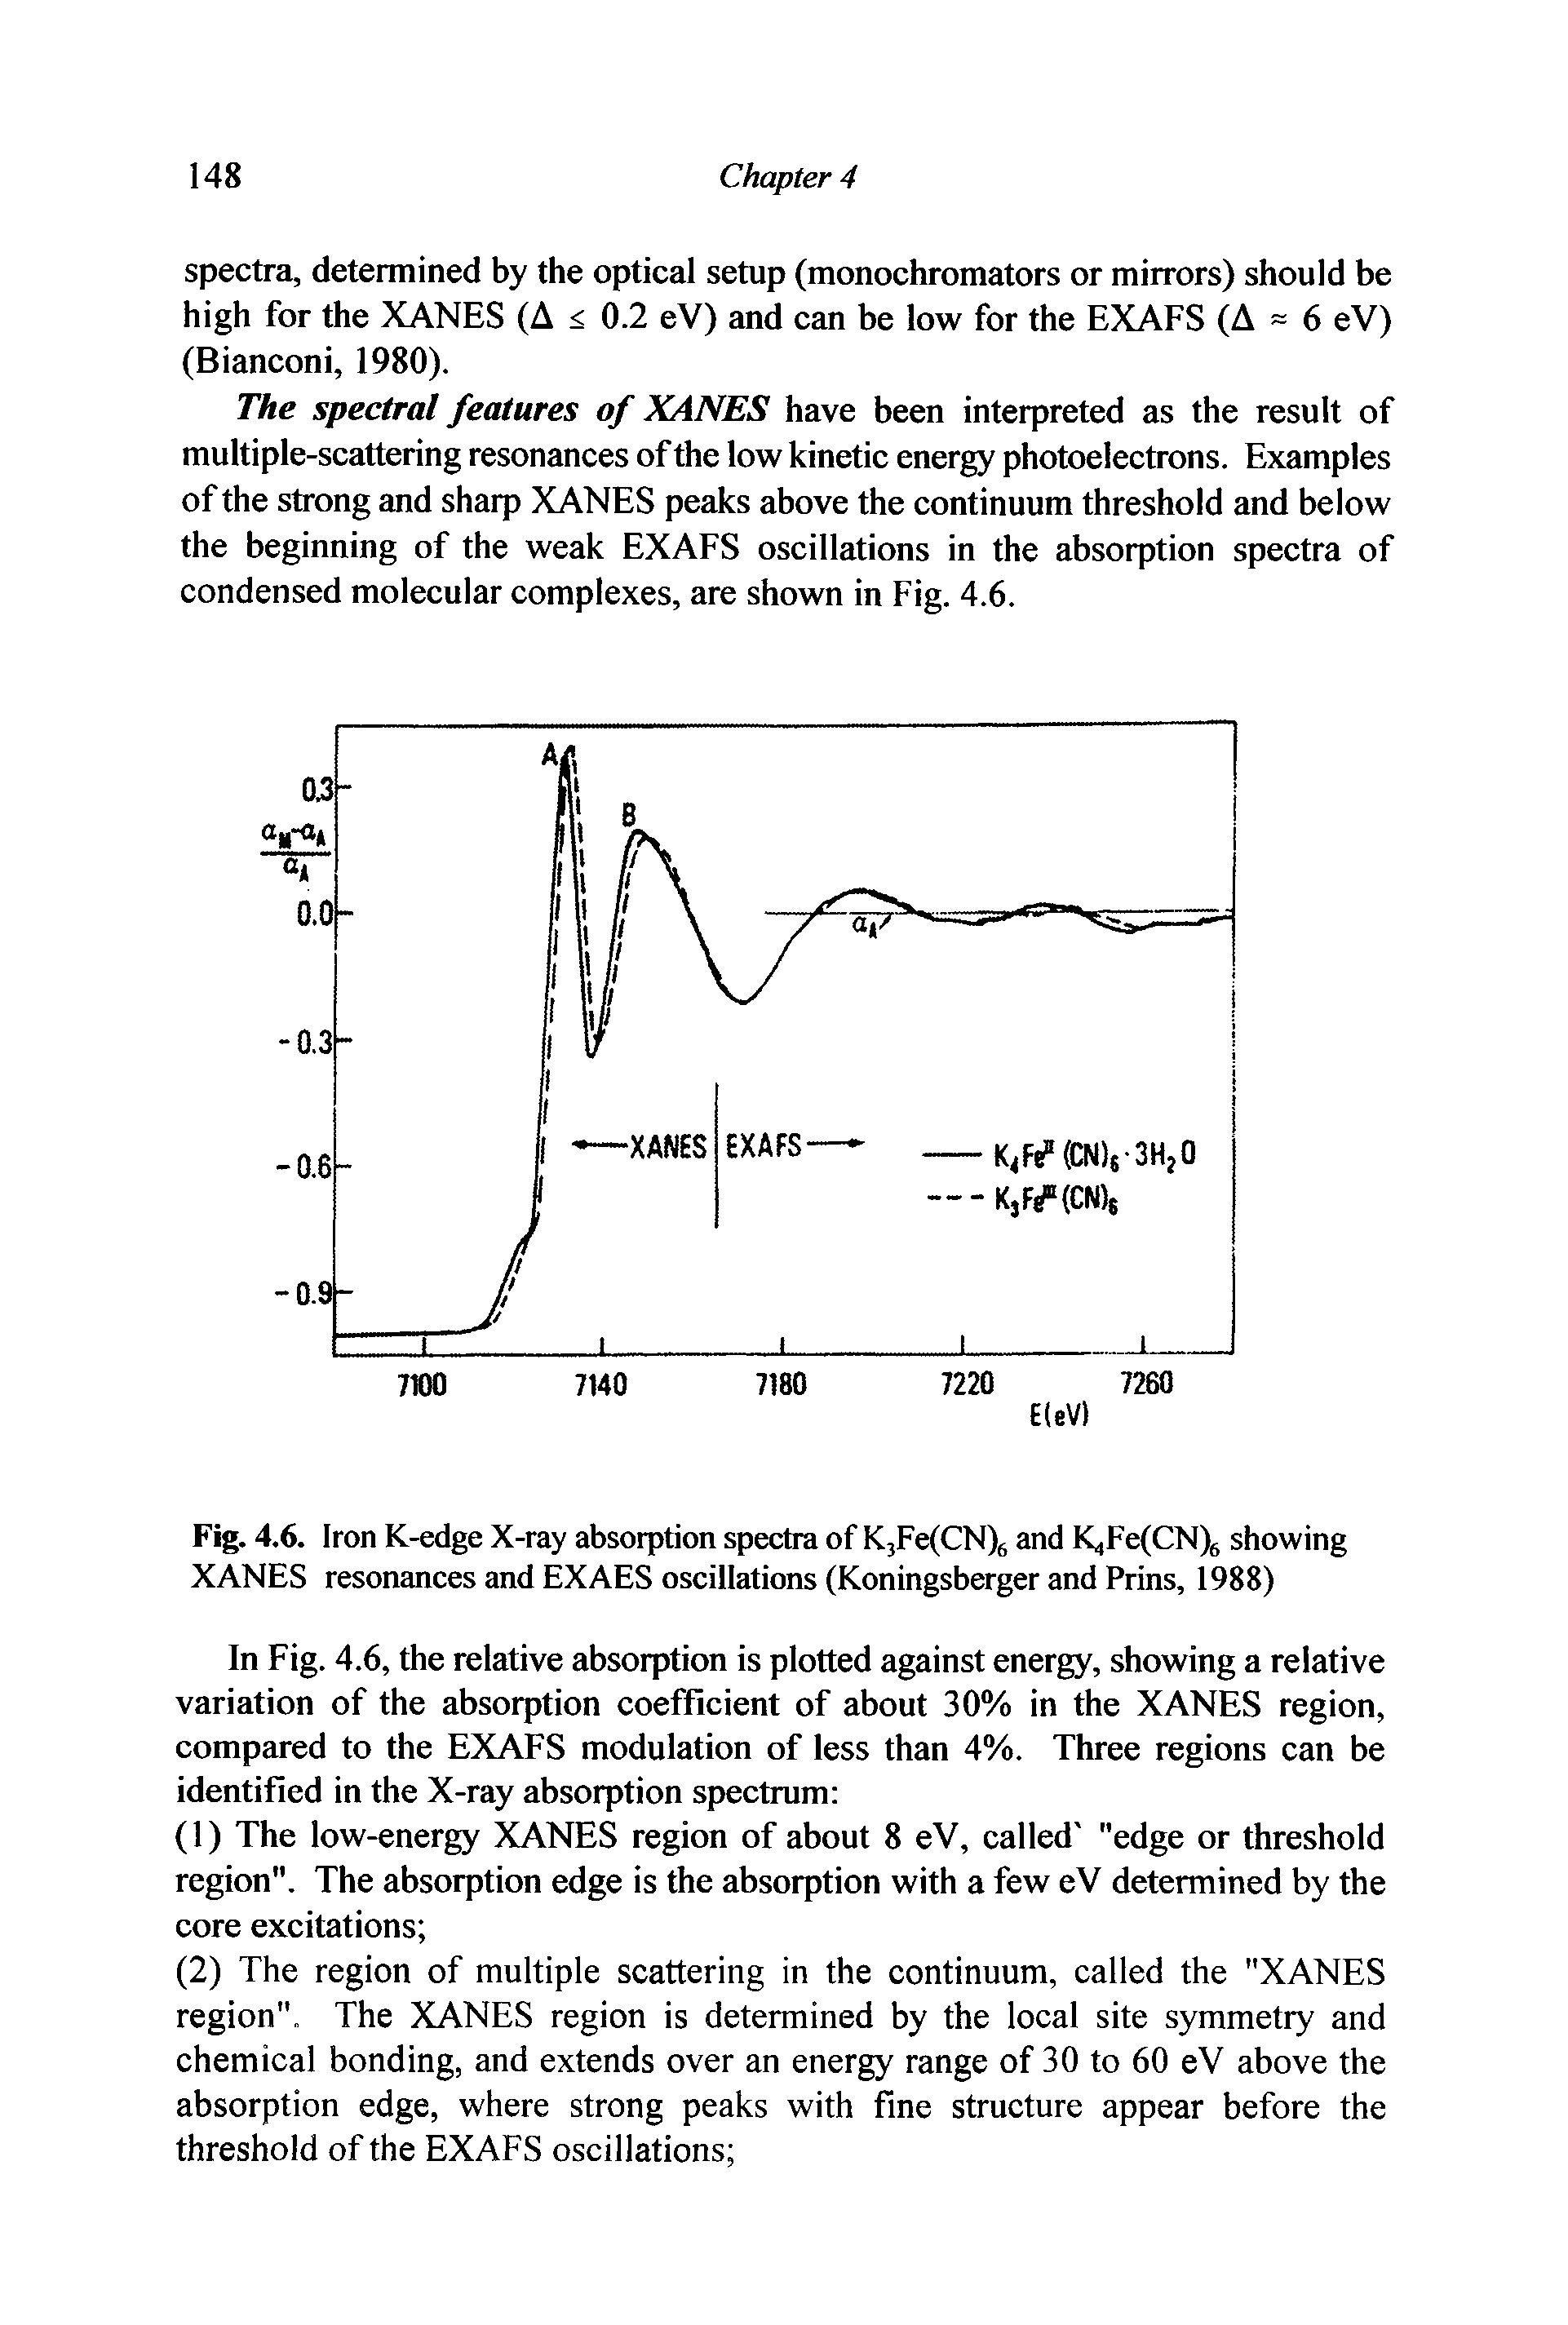 Fig. 4.6. Iron K-edge X-ray absorption spectra of K3Fe(CN)6 and IQFe N) showing XANES resonances and EX AES oscillations (Koningsberger and Prins, 1988)...